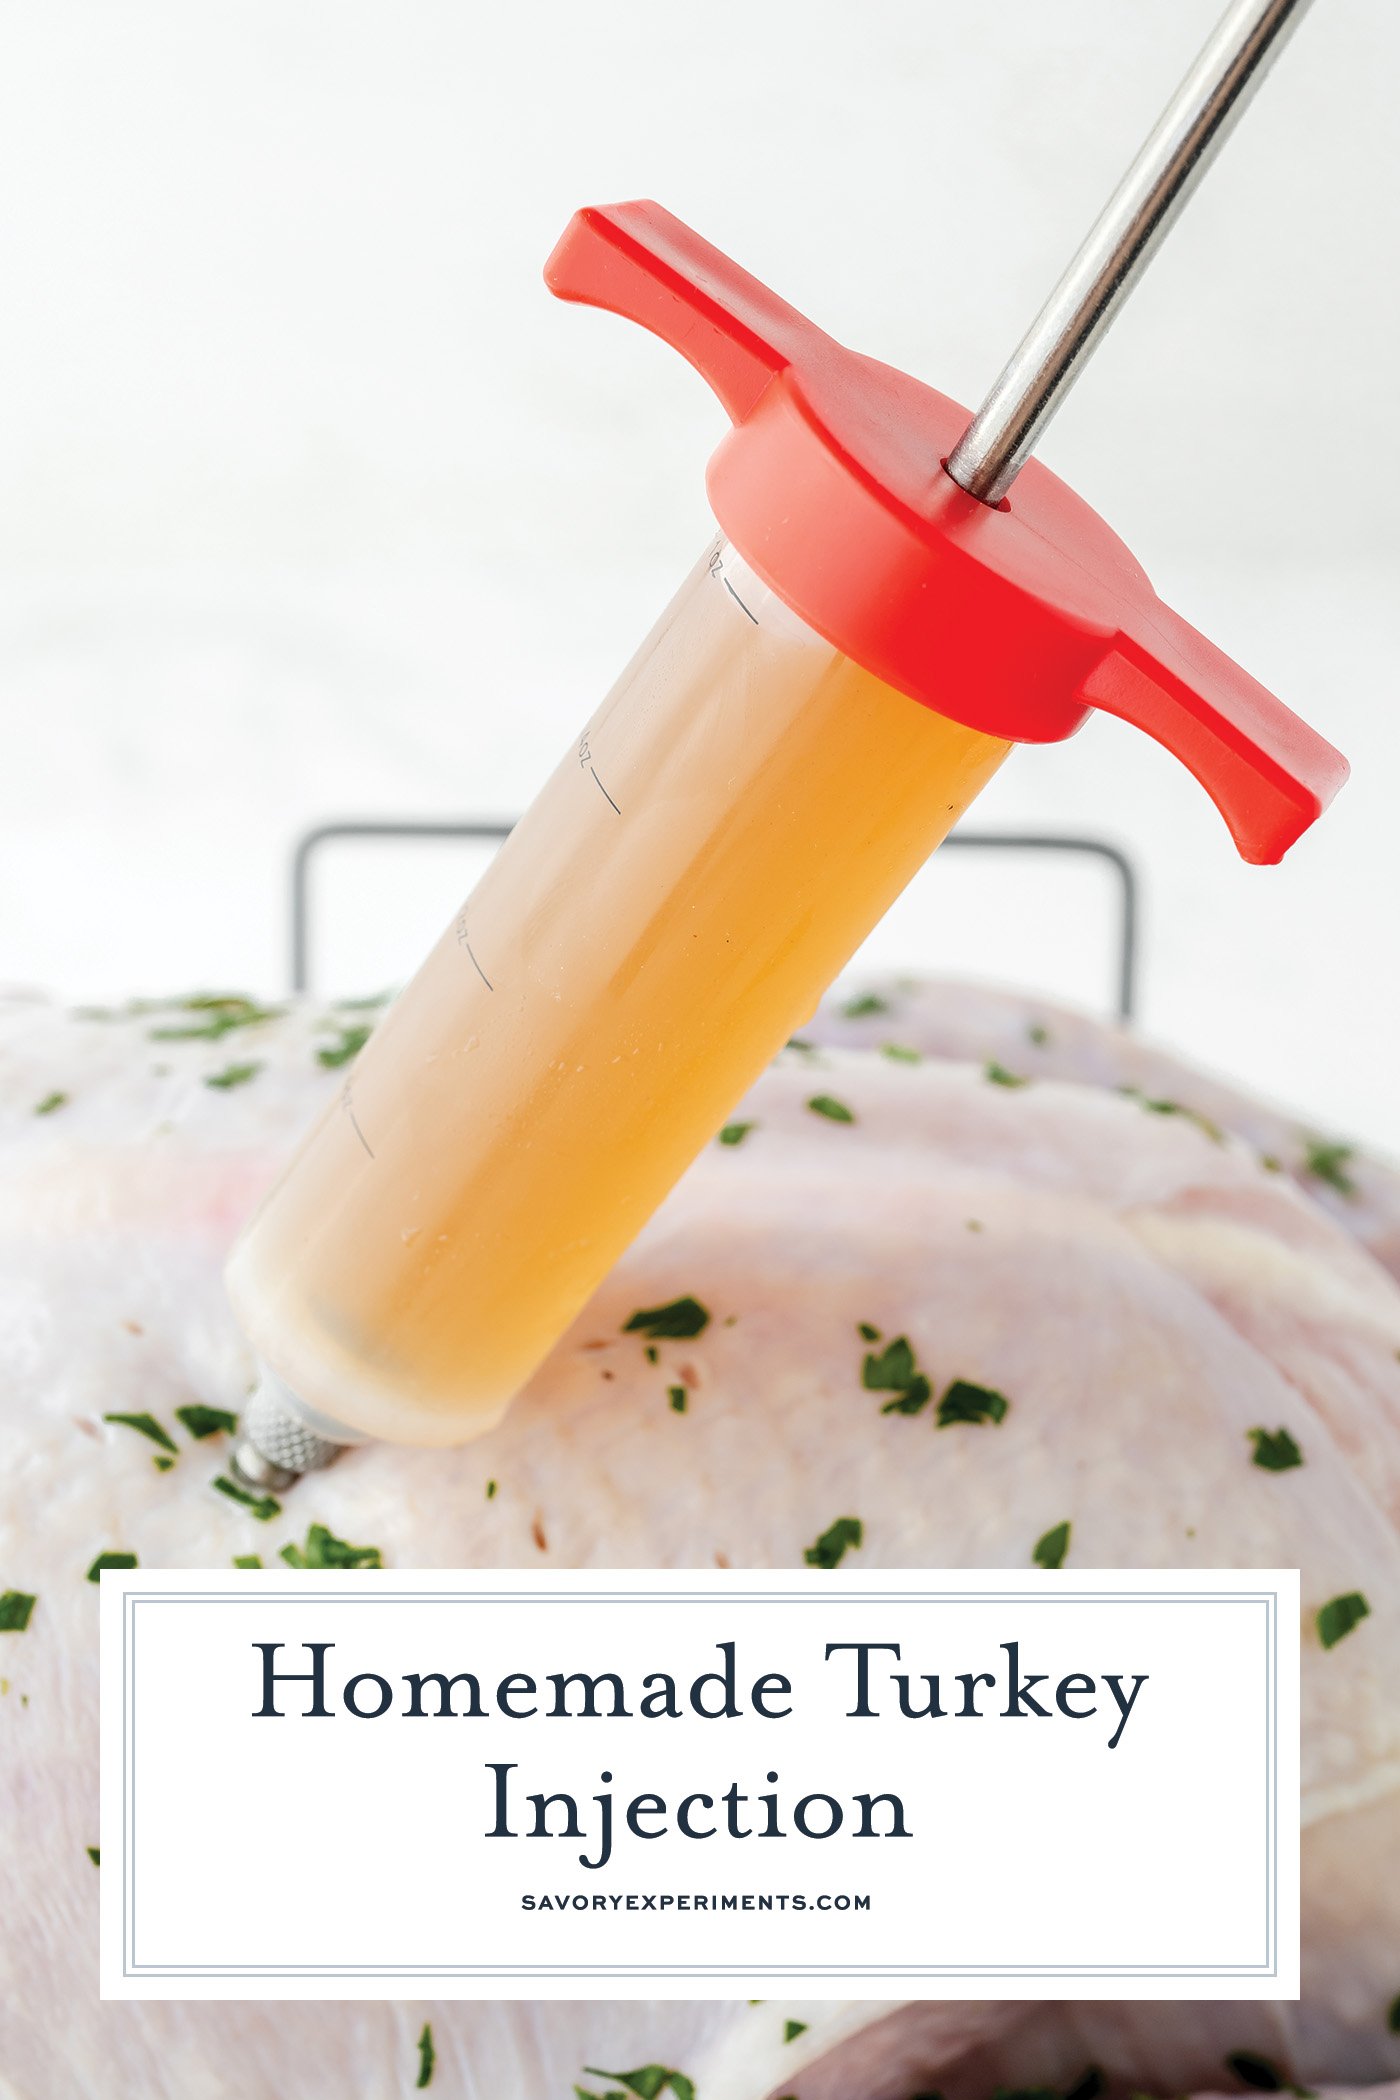 Homemade Turkey Injection Made Over 10